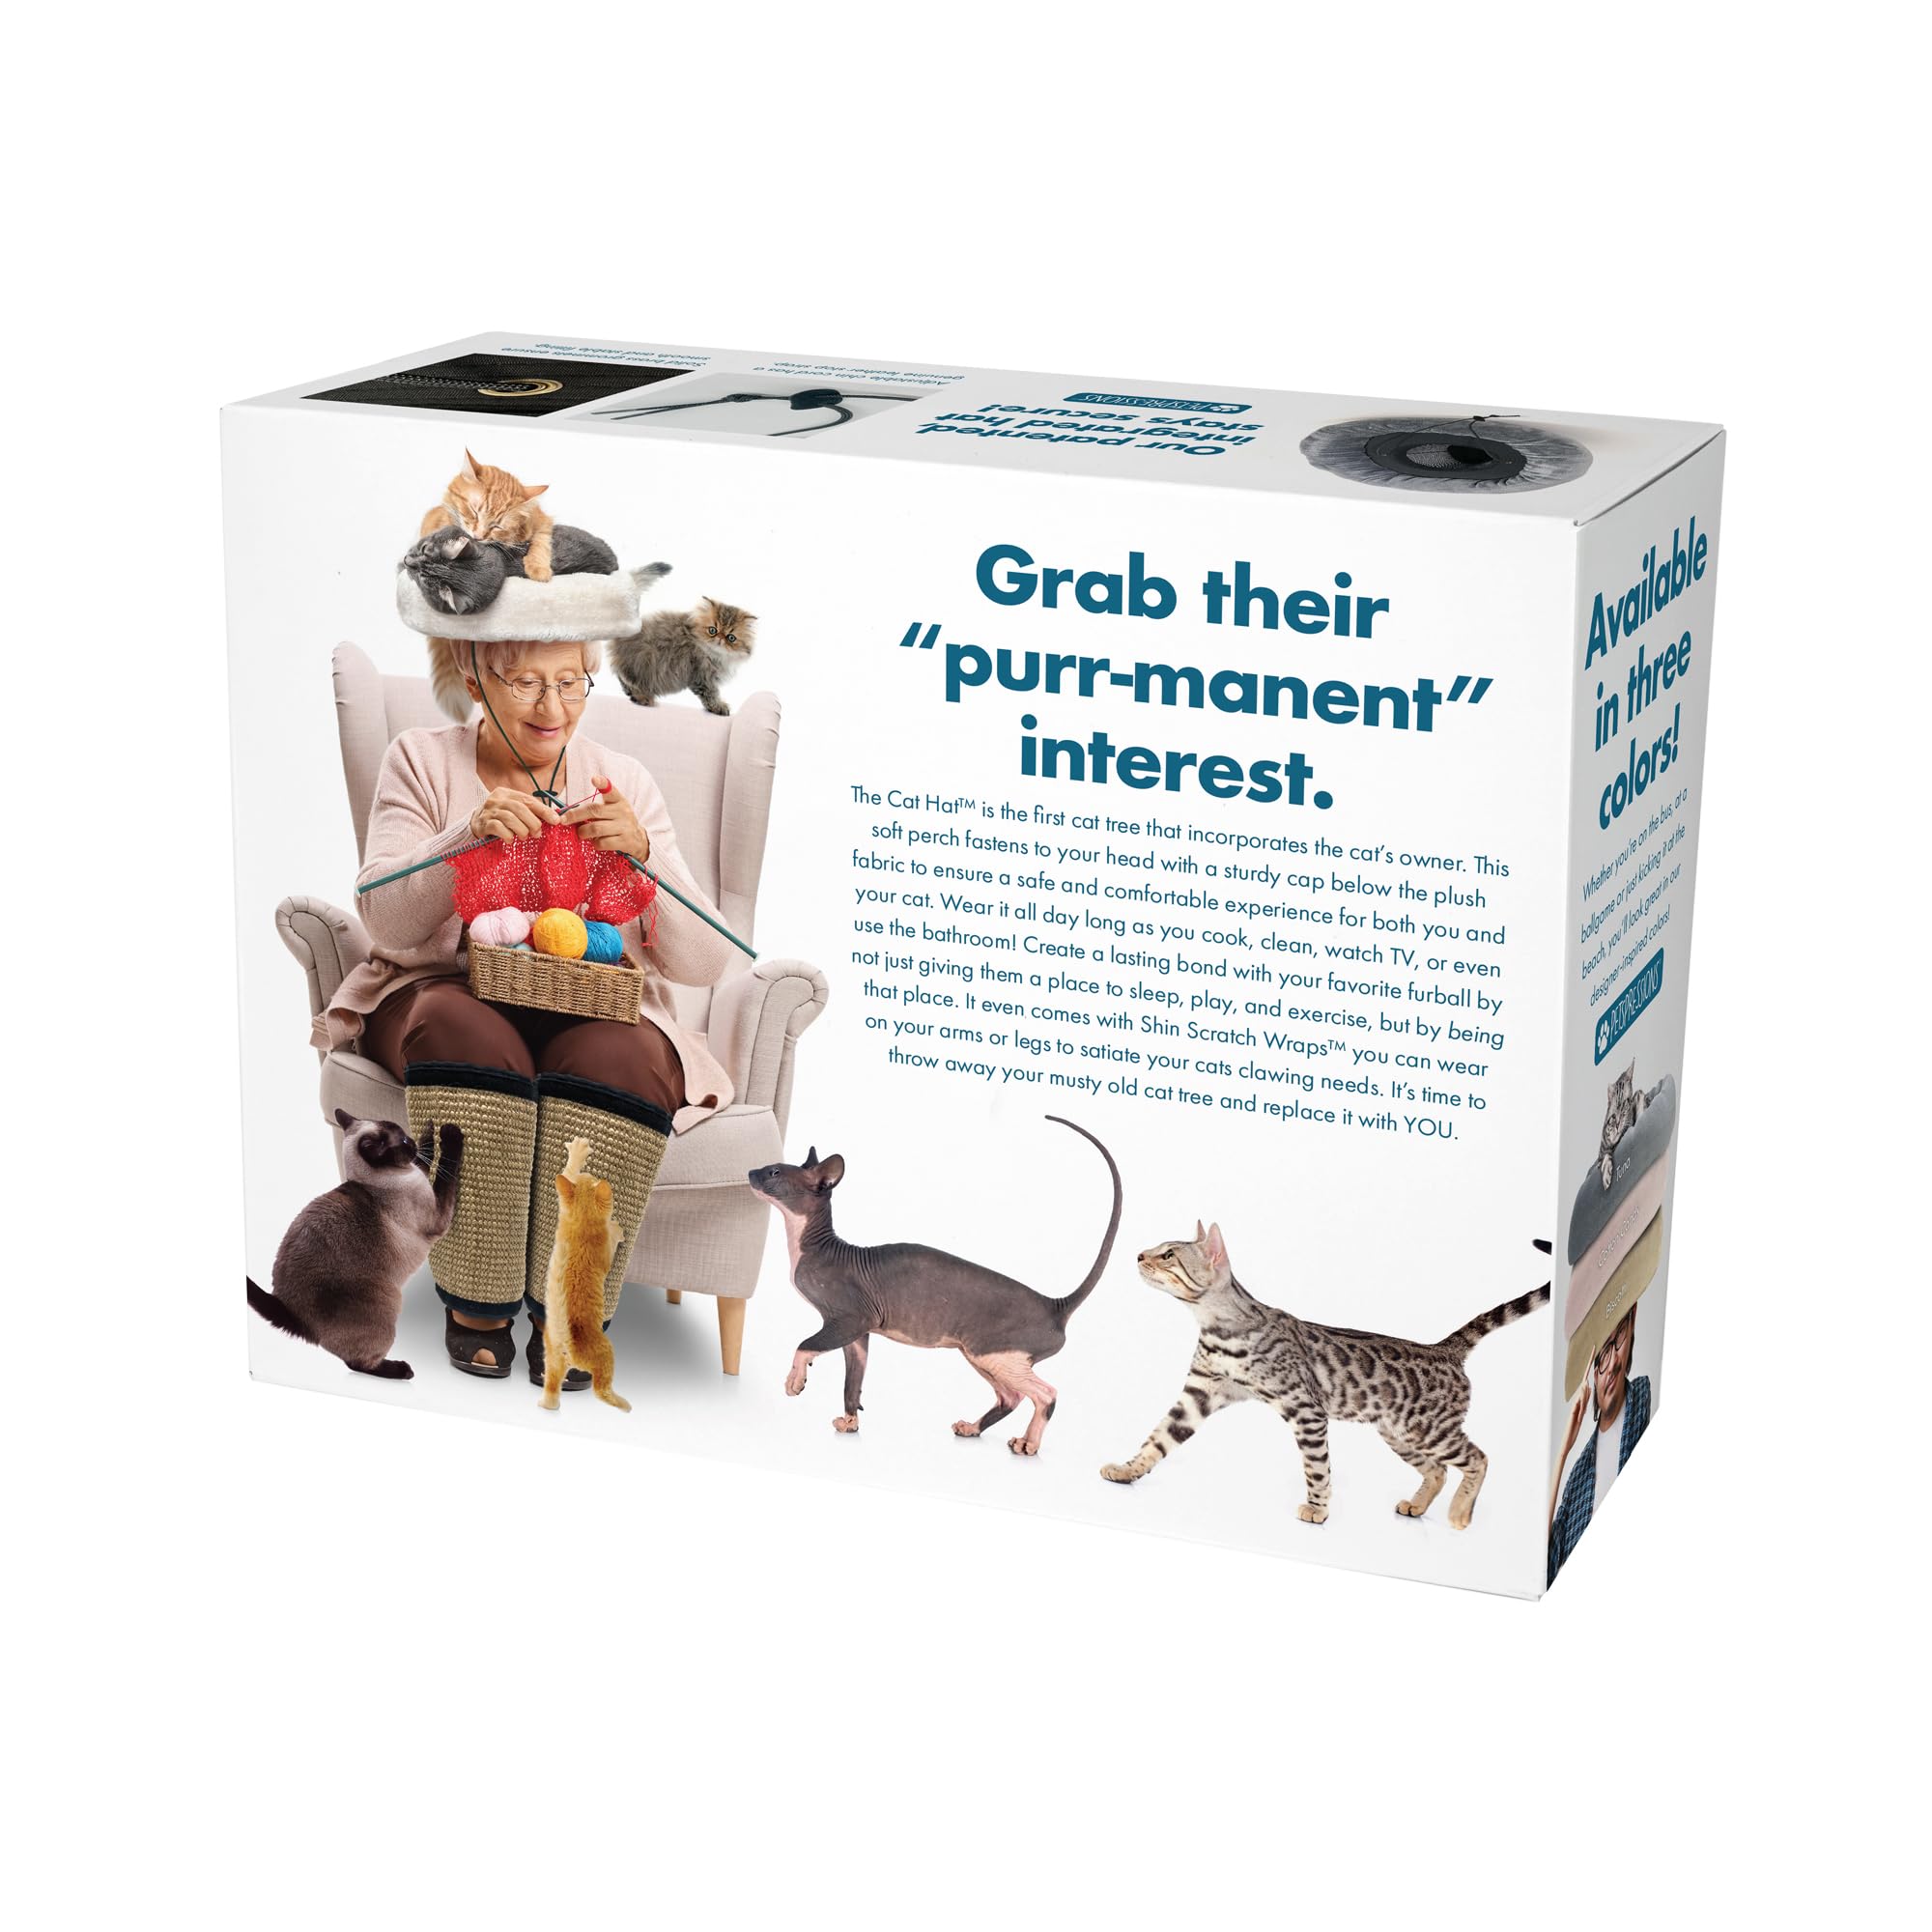 Prank Pack Prank Gift Box, Cat Hat, Wrap Your Real Present in a Funny Authentic Prank-O Gag Present Box, Novelty Gifting Box for Pranksters, Wrap Box